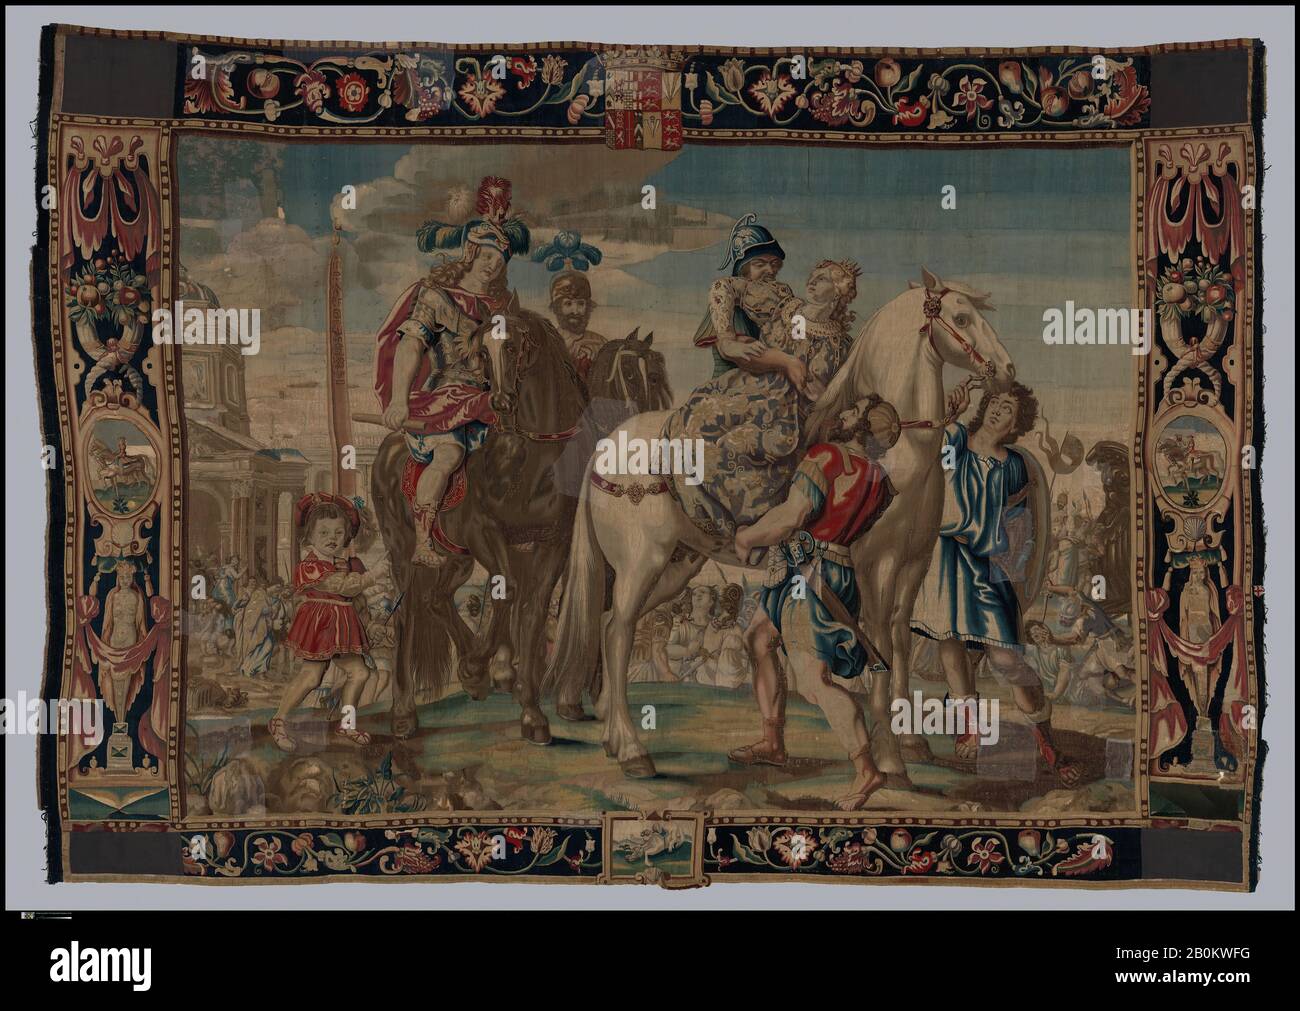 Frans Cleyn, The Seizure of Cassandra by Ajax from a set of The Horses, British, probably Mortlake, Probably made at Mortlake Tapestry Manufactory (British, 1619–1703), ca. 1650–70, British, probably Mortlake, Wool, silk (16-19 warps per inch, 6-7 per cm.), H. 144 x W. 198 inches (365.8 x 502.9 cm), Textiles-Tapestries Stock Photo